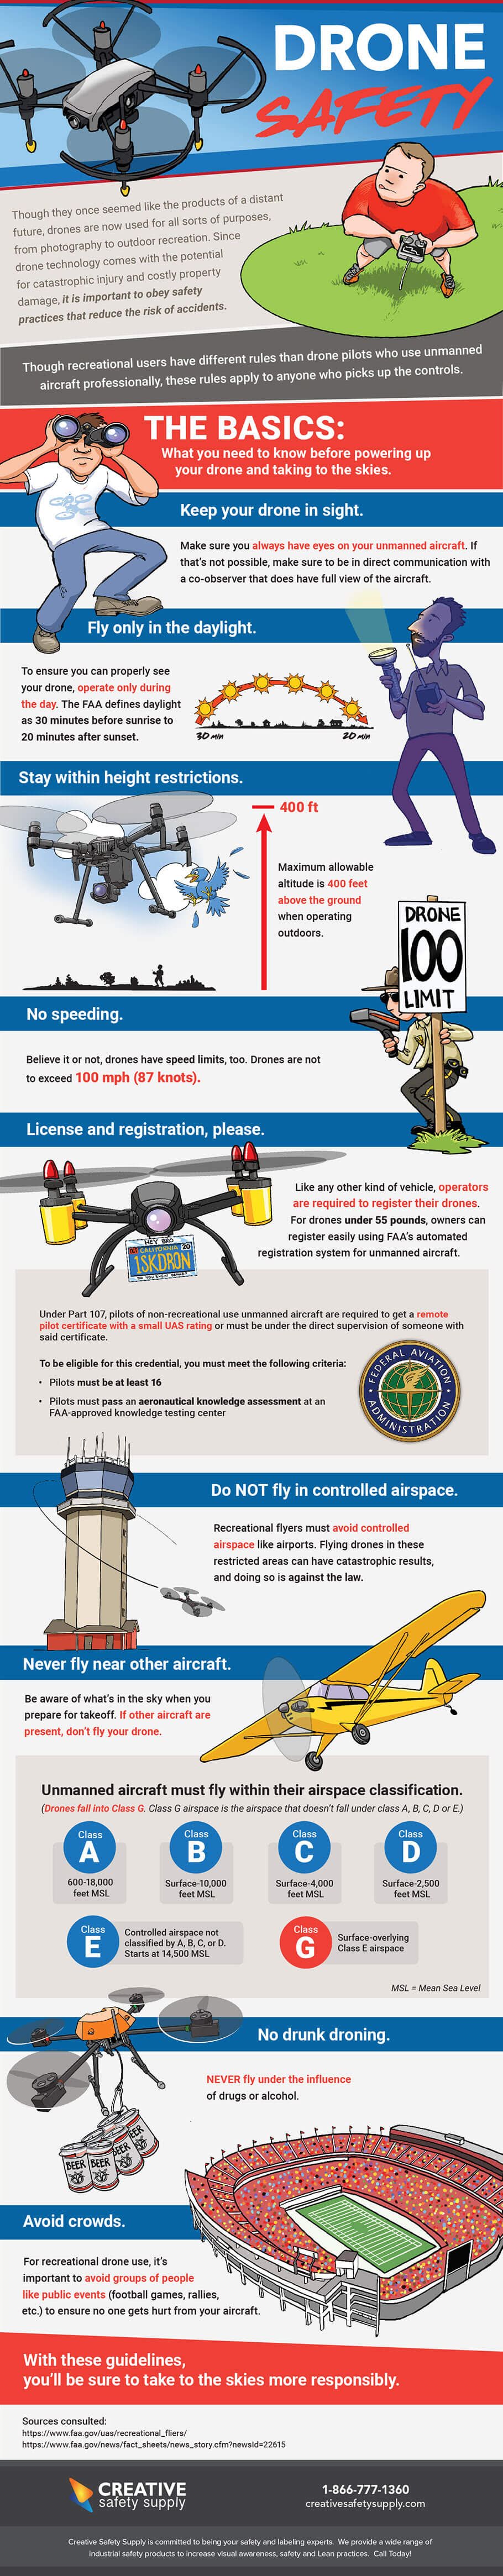 Tips for Drone Safety #infographic